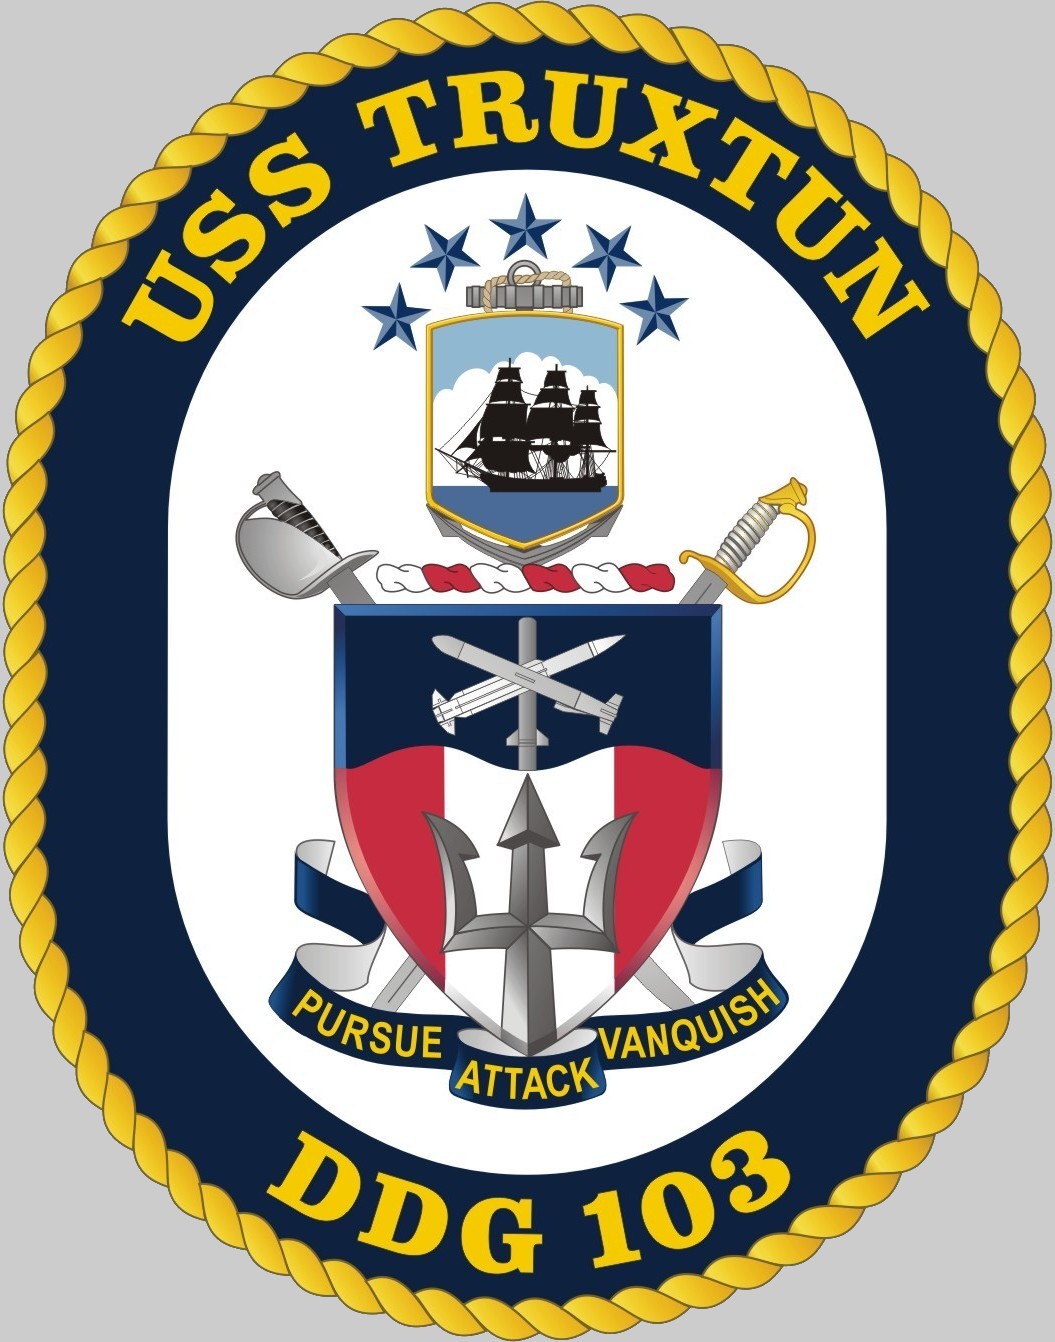 ddg-103 uss truxtun crest insignia patch badge arleigh burke class guided missile destroyer aegis us navy 02c